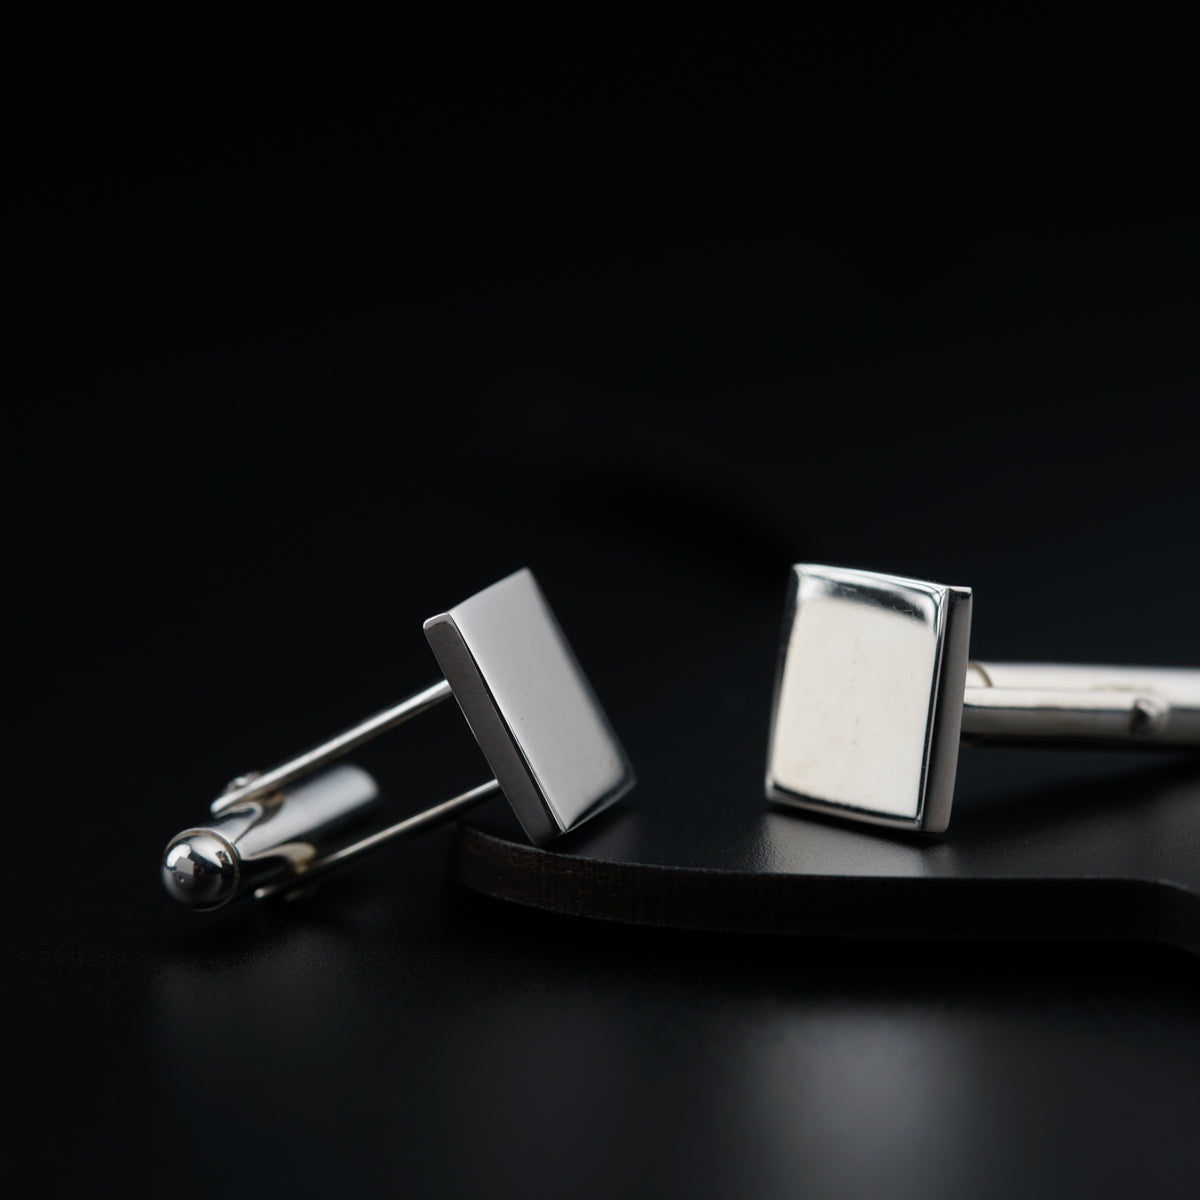 a pair of square cufflinks on a black surface